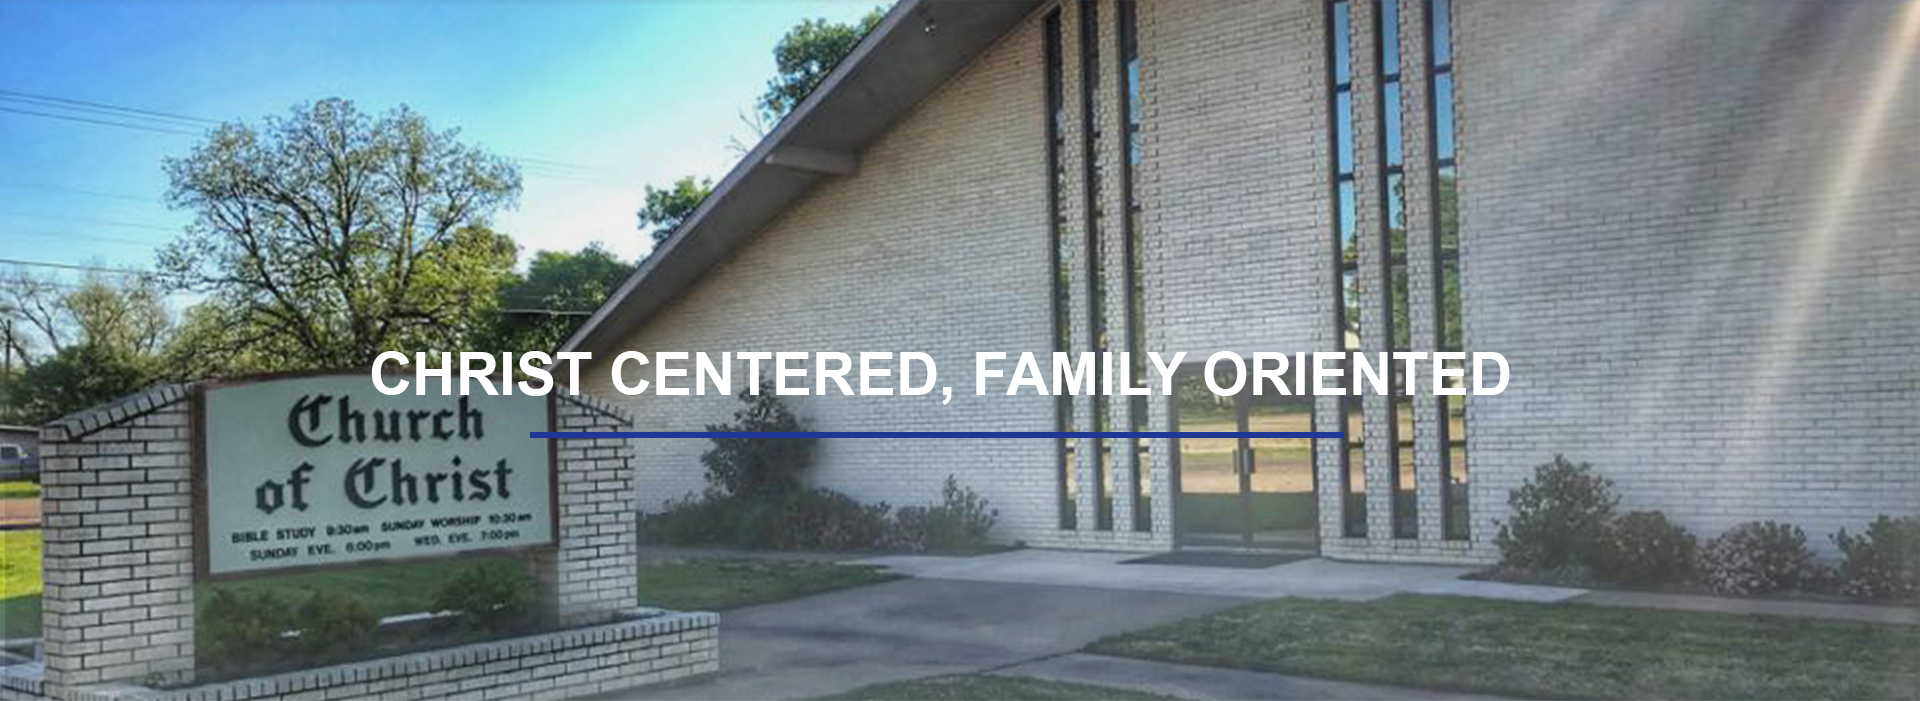 CHRIST CENTERED, FAMILY ORIENTED